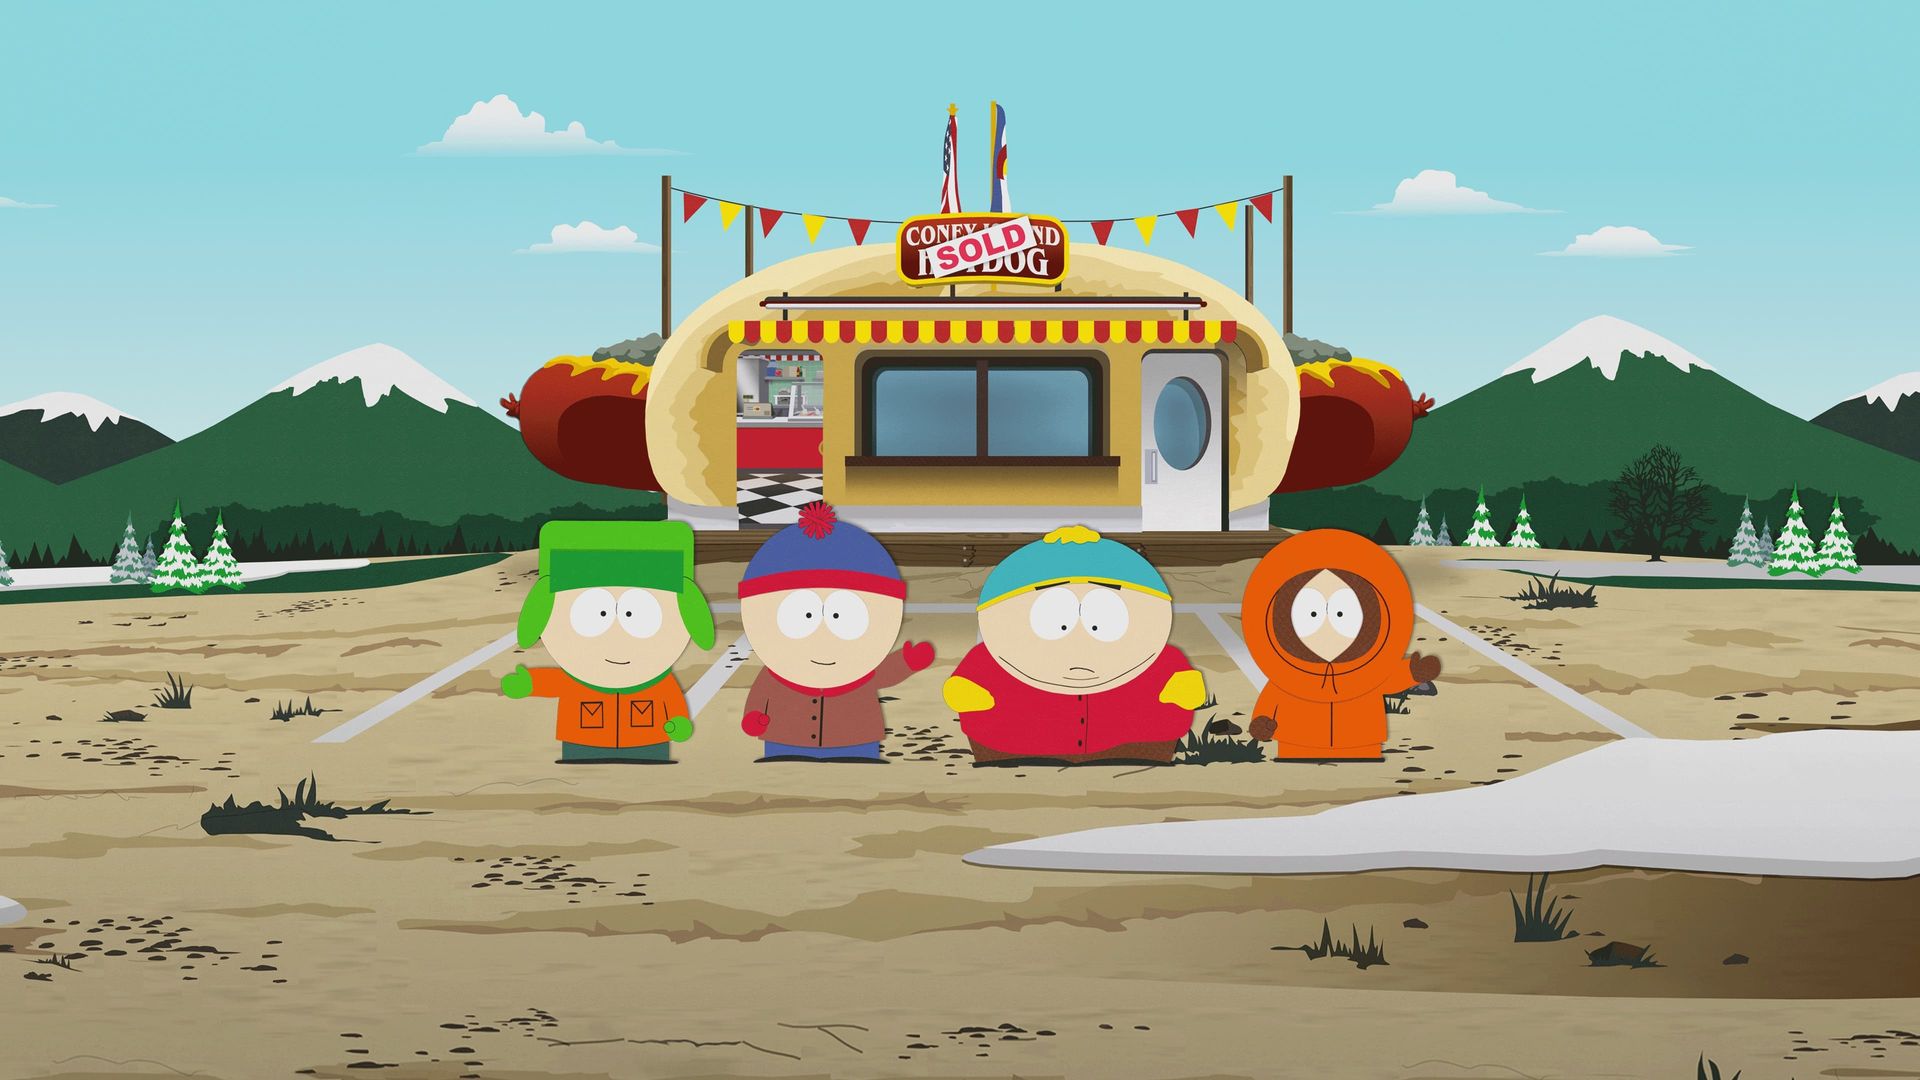 South Park the Streaming Wars background